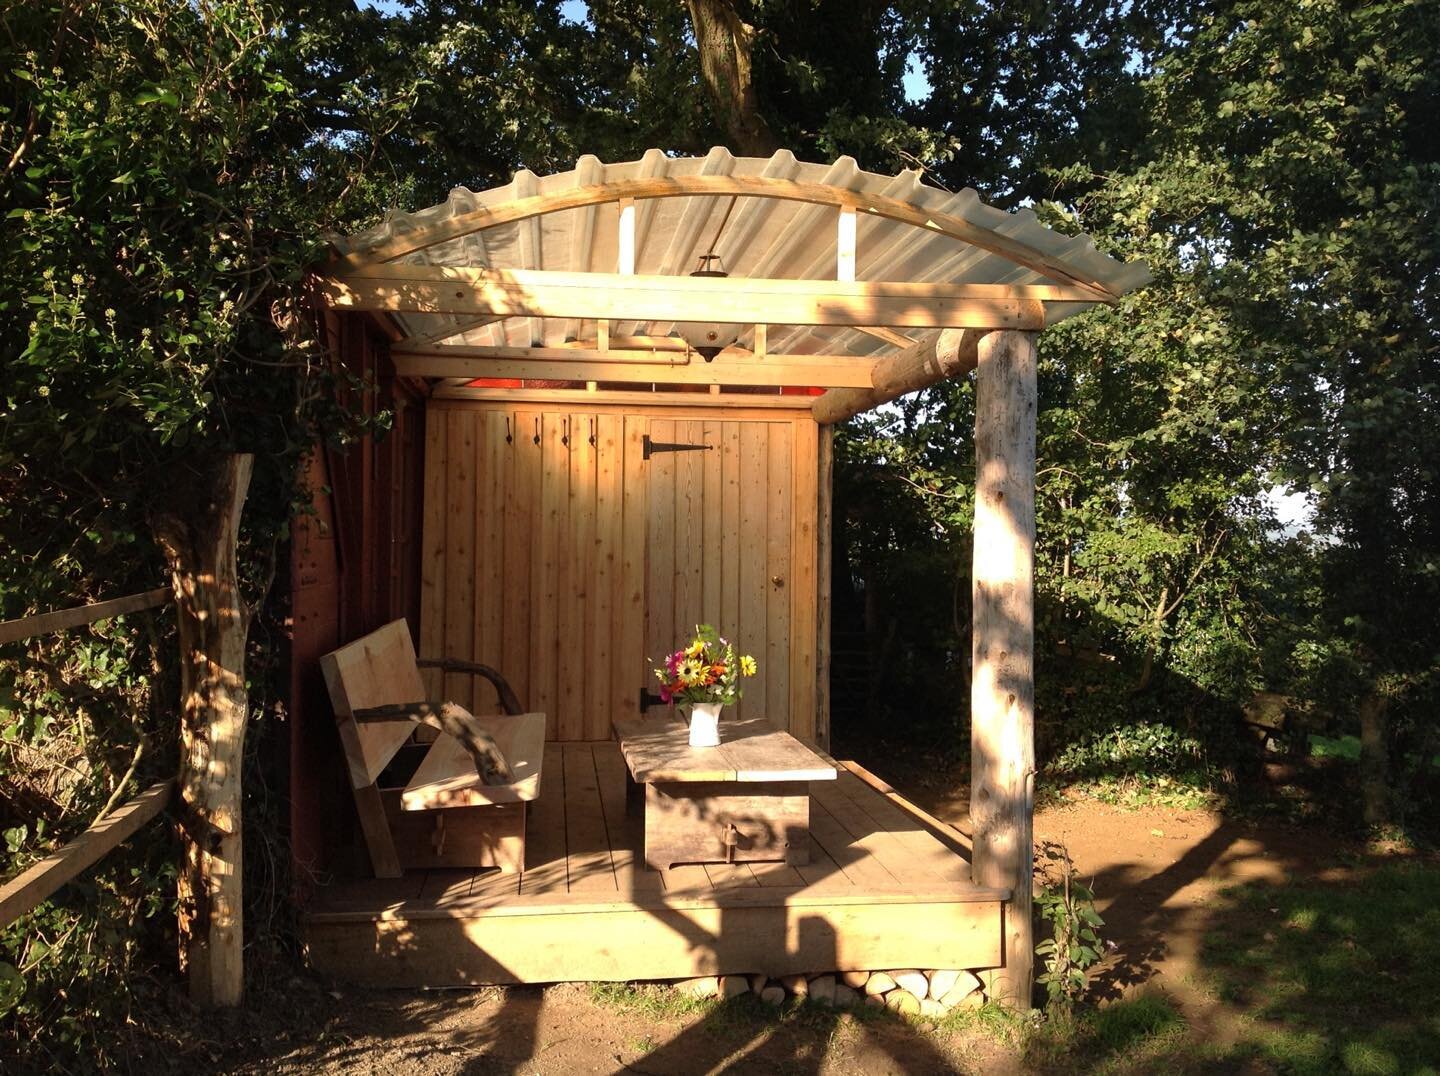 The delight of Gabriel&rsquo;s Wagon awaits anyone who books at ANY time of the year. This little haven of delight brings you peace, good sleep and tranquility.. always with a touch of fun.. #outdoor living #close to nature#touch of luxury Book now f